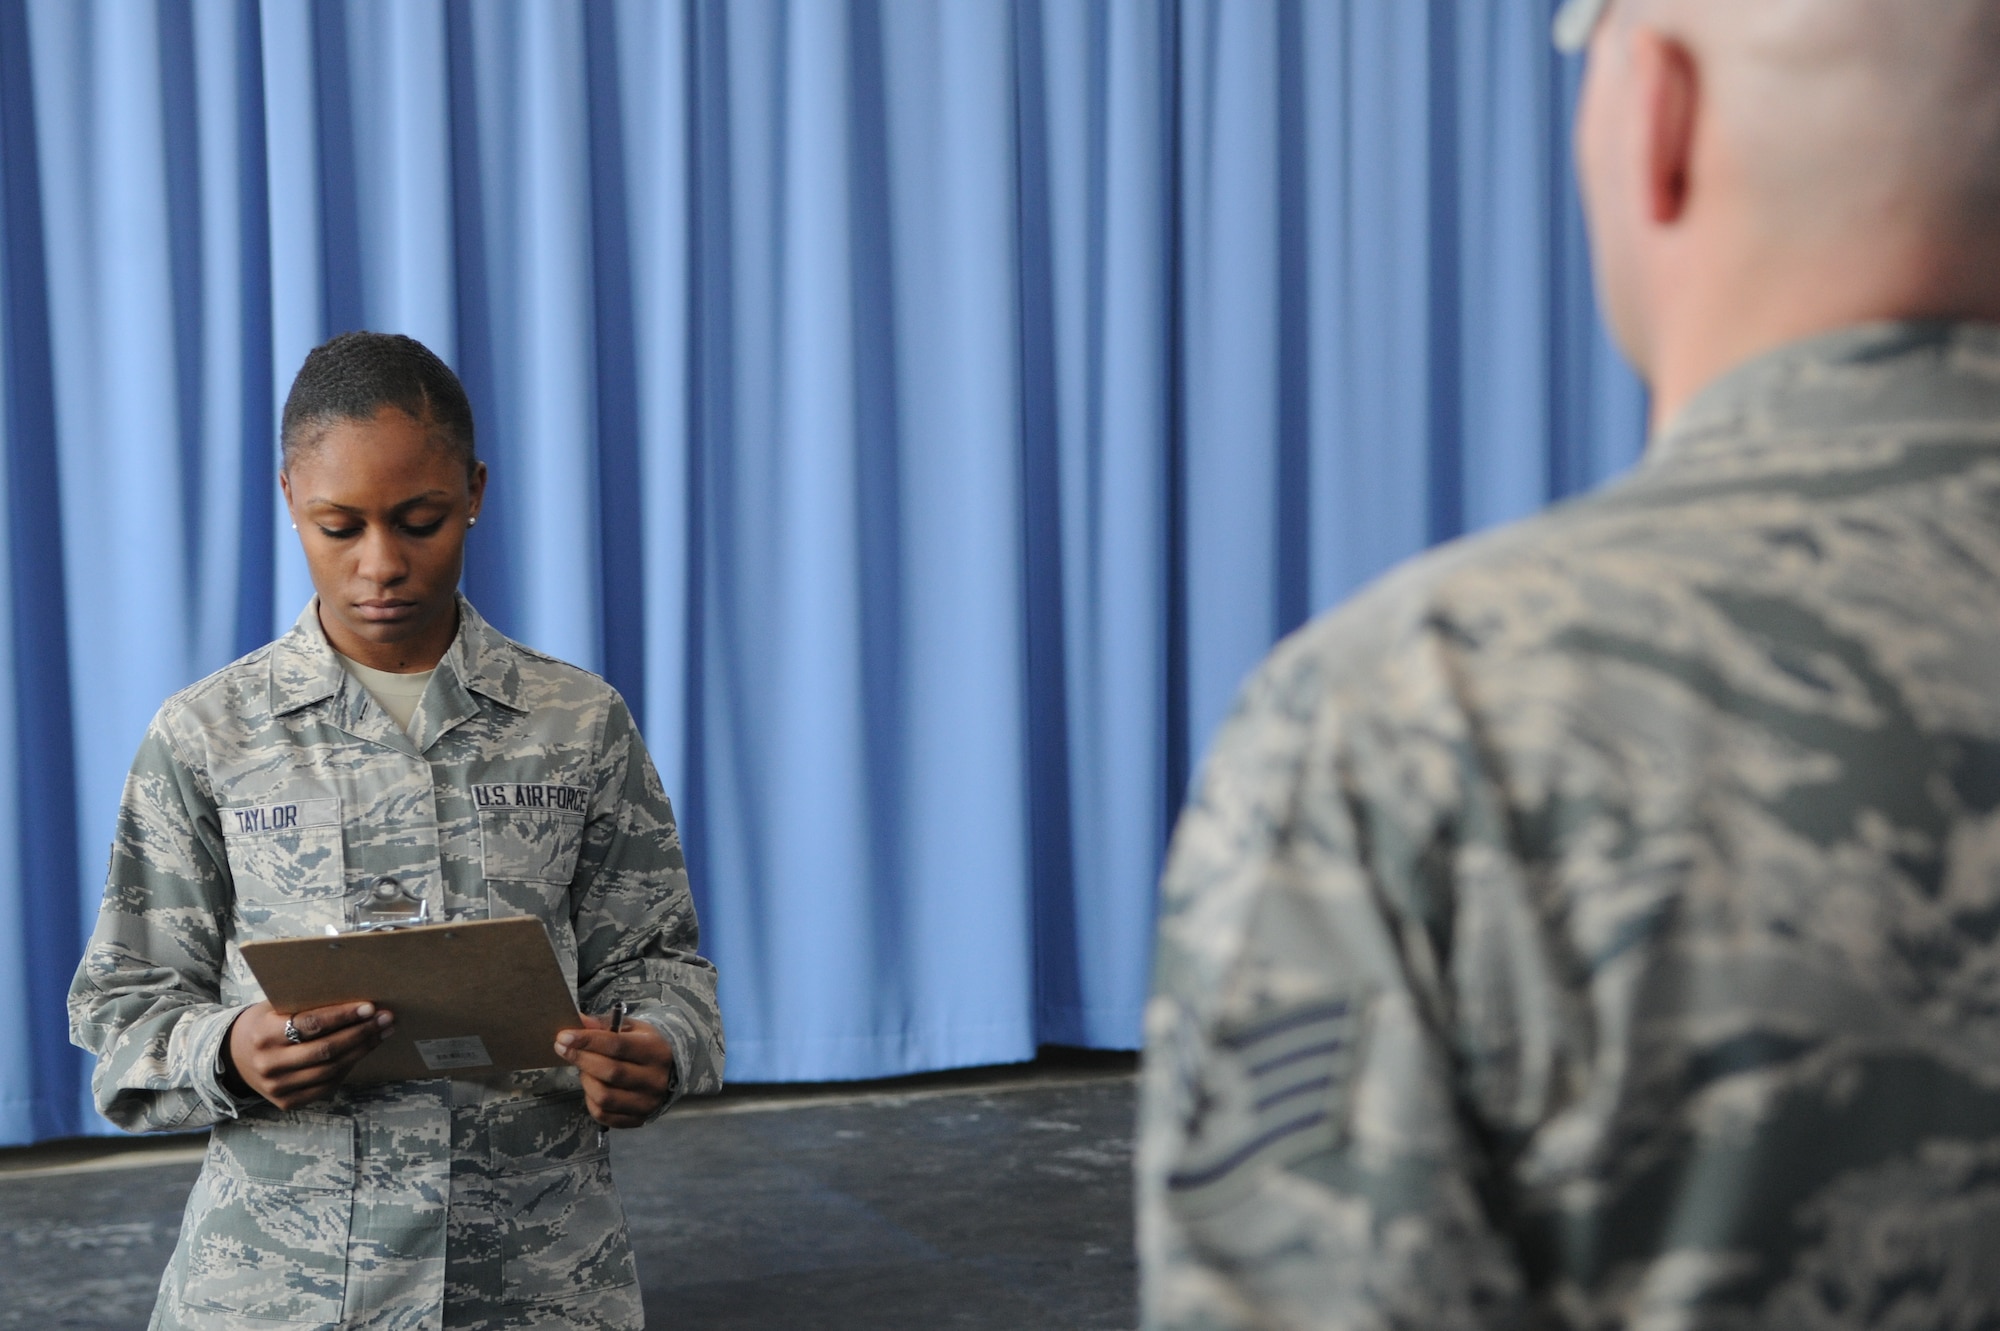 Airman 1st Class Grace Taylor prepares to call the next movement for a staff sergeant’s evaluation on Joint Base Anacostia-Bolling, Washington, D.C., on March 4, 2014. Taylor, United States Air Force Honor Guard tech school instructor, will determine if his skills are proficient or needs to endure more training. (U.S. Air Force photo/Airman 1st Class Ryan J. Sonnier)